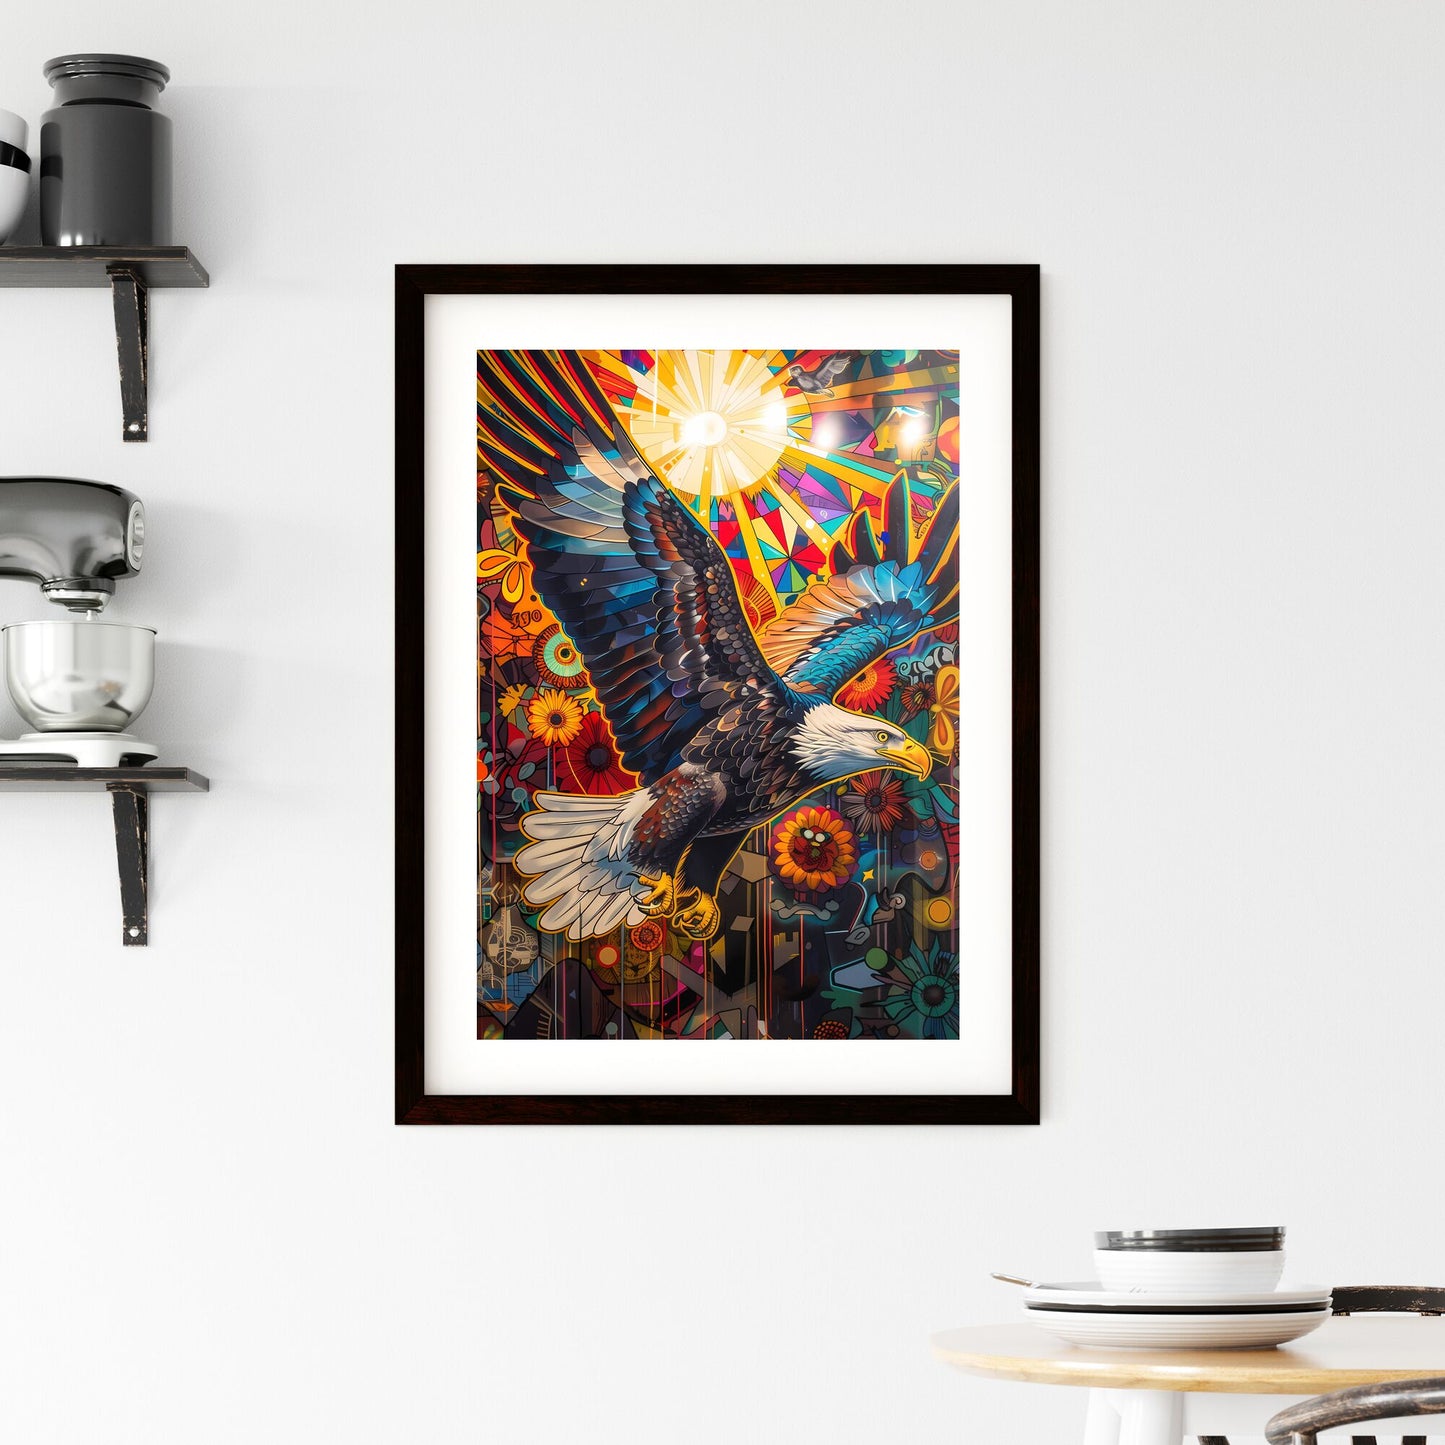 Psychedelic Eagle Soaring Amidst Vibrant Pop Art Landscape, Graffiti, Stained Glass, and Ray of Sunlight Default Title